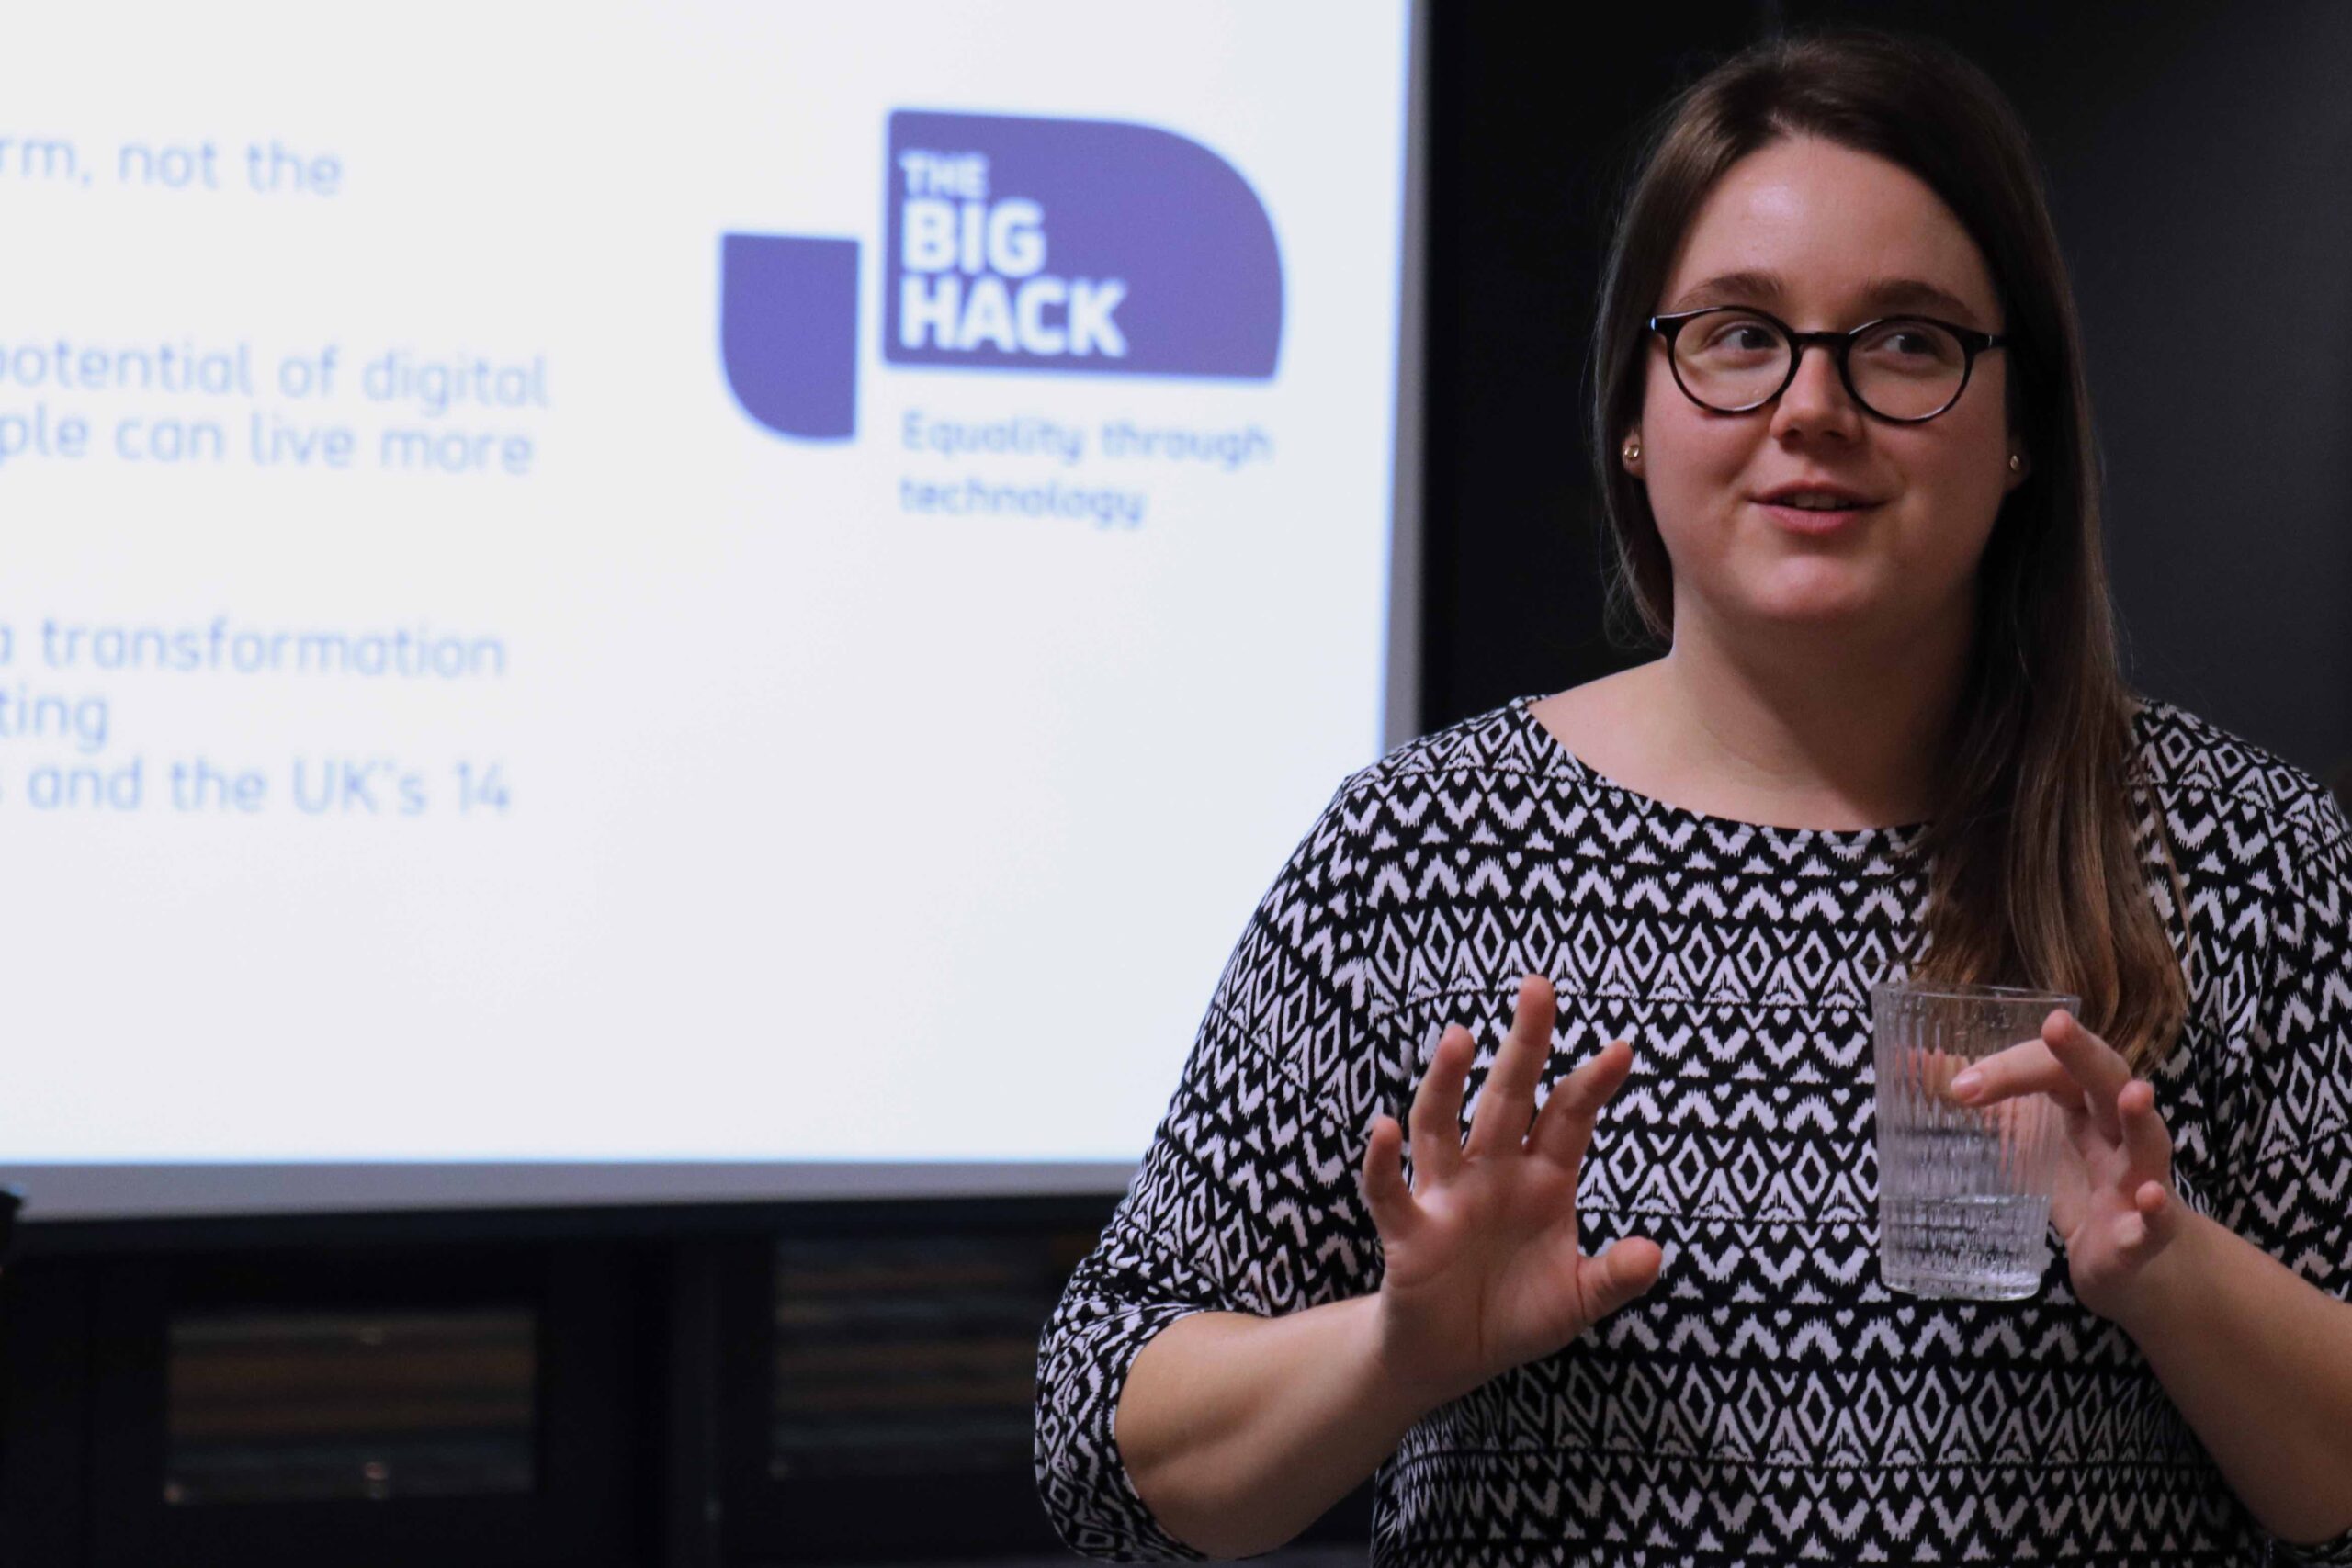 Woman is talking in front of a presentation including The Big Hack logo